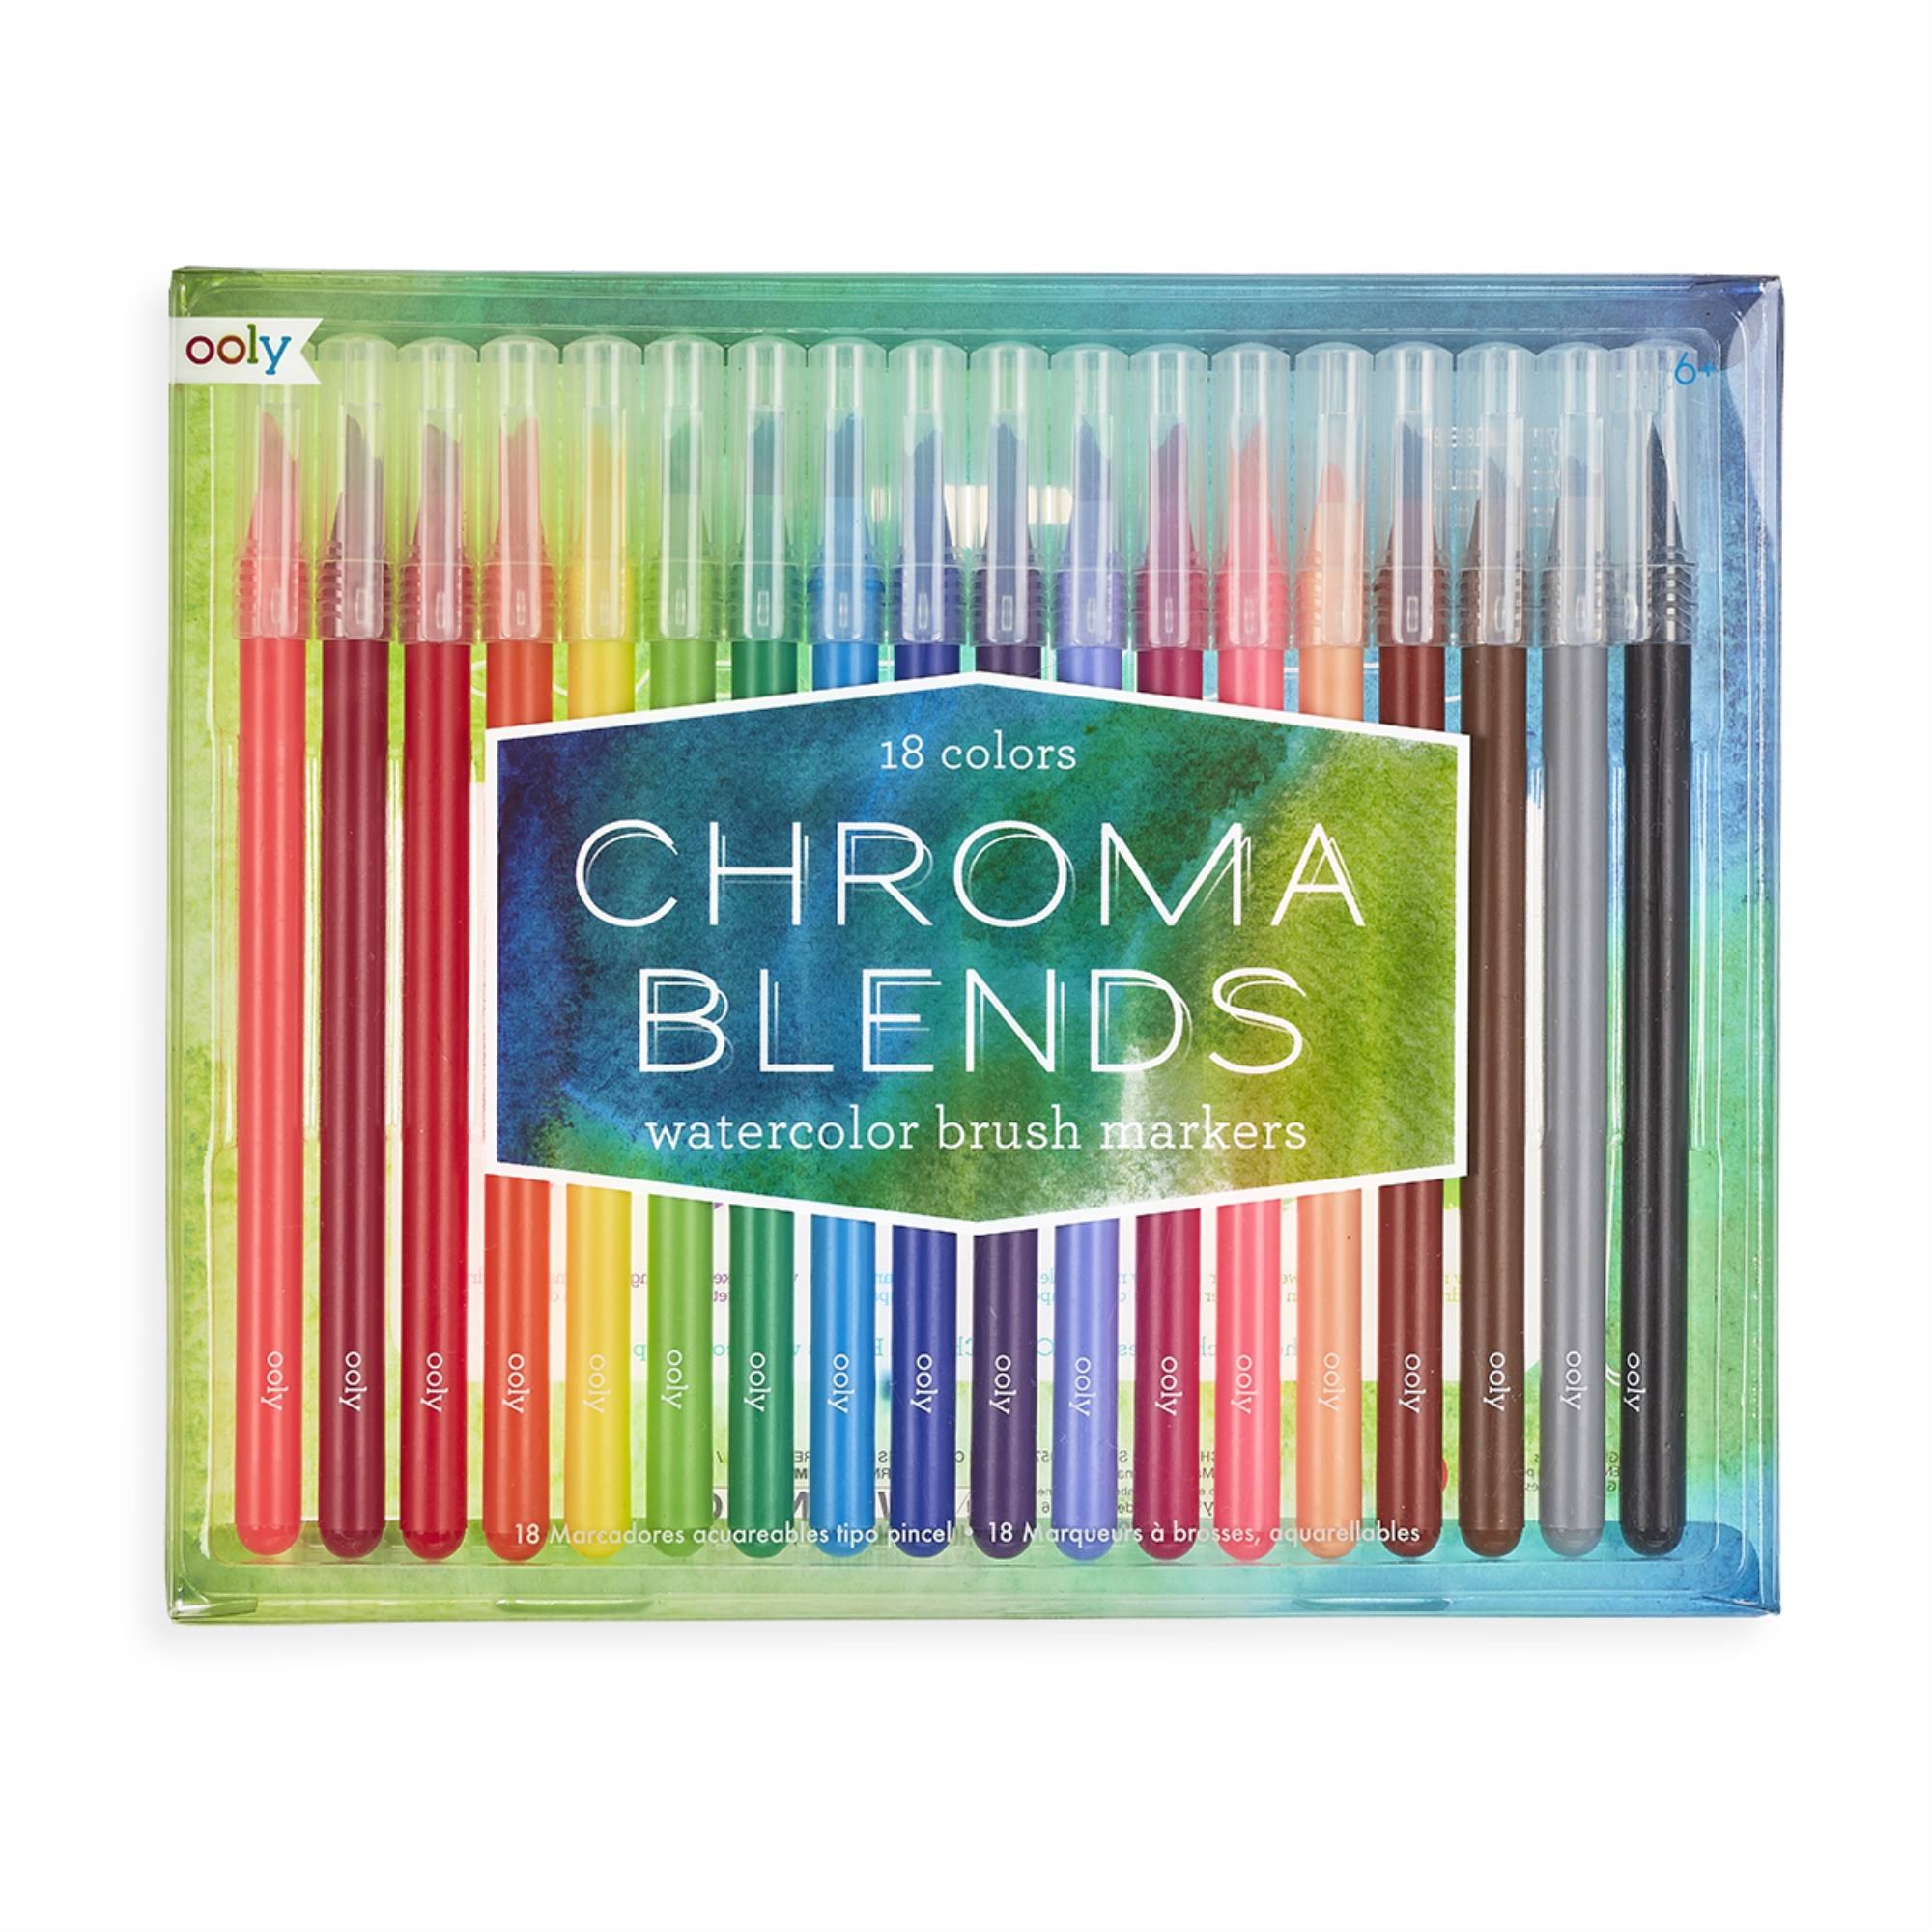 OOLY - Chroma Blends Watercolor Brush Markers